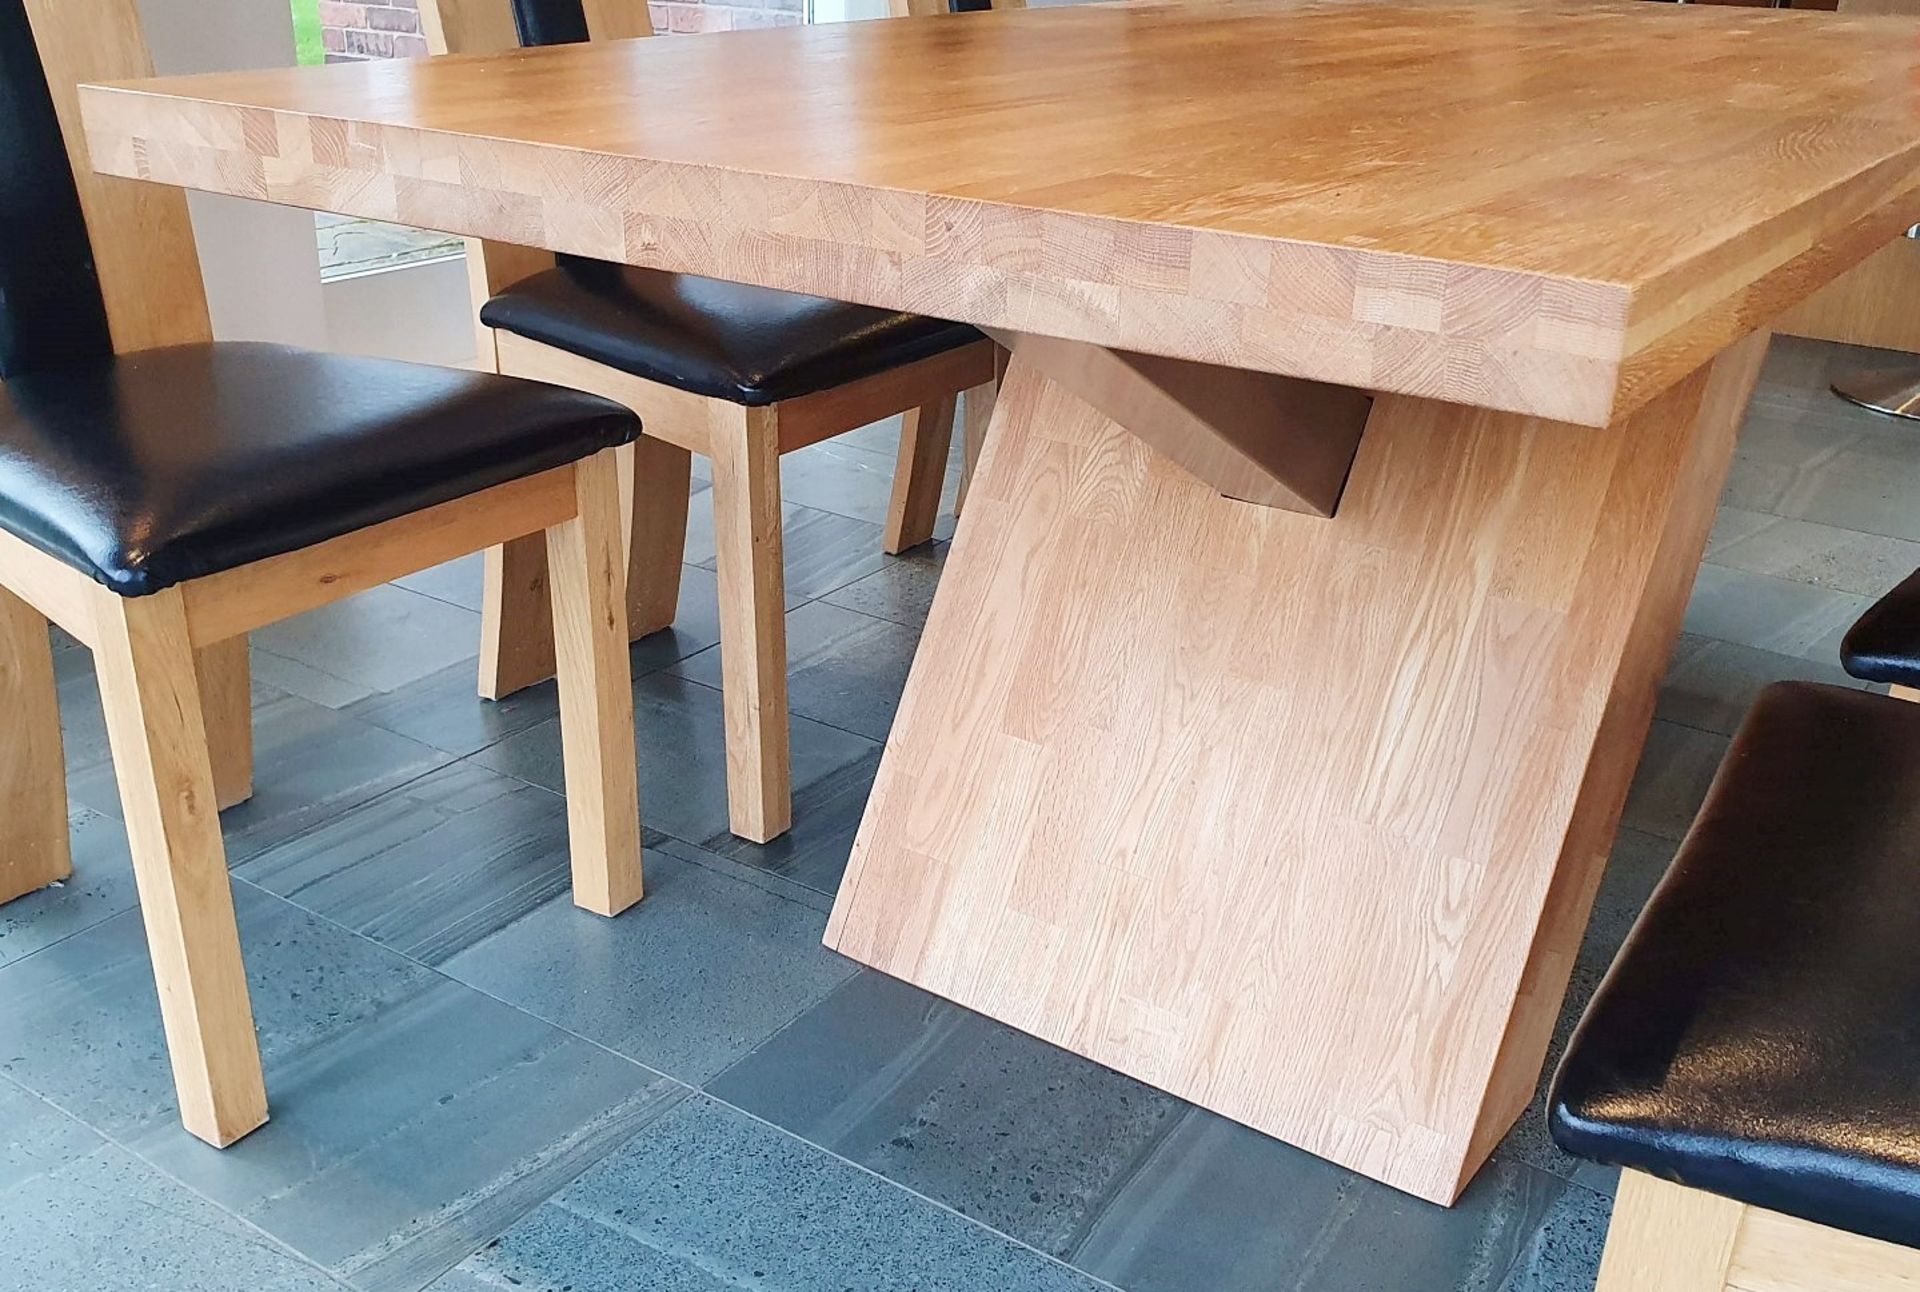 1 x Solid Oak 1.8 Metre Dining Table With 6 x High Back Dining Chairs - Pre-owned In Great Condition - Image 7 of 12